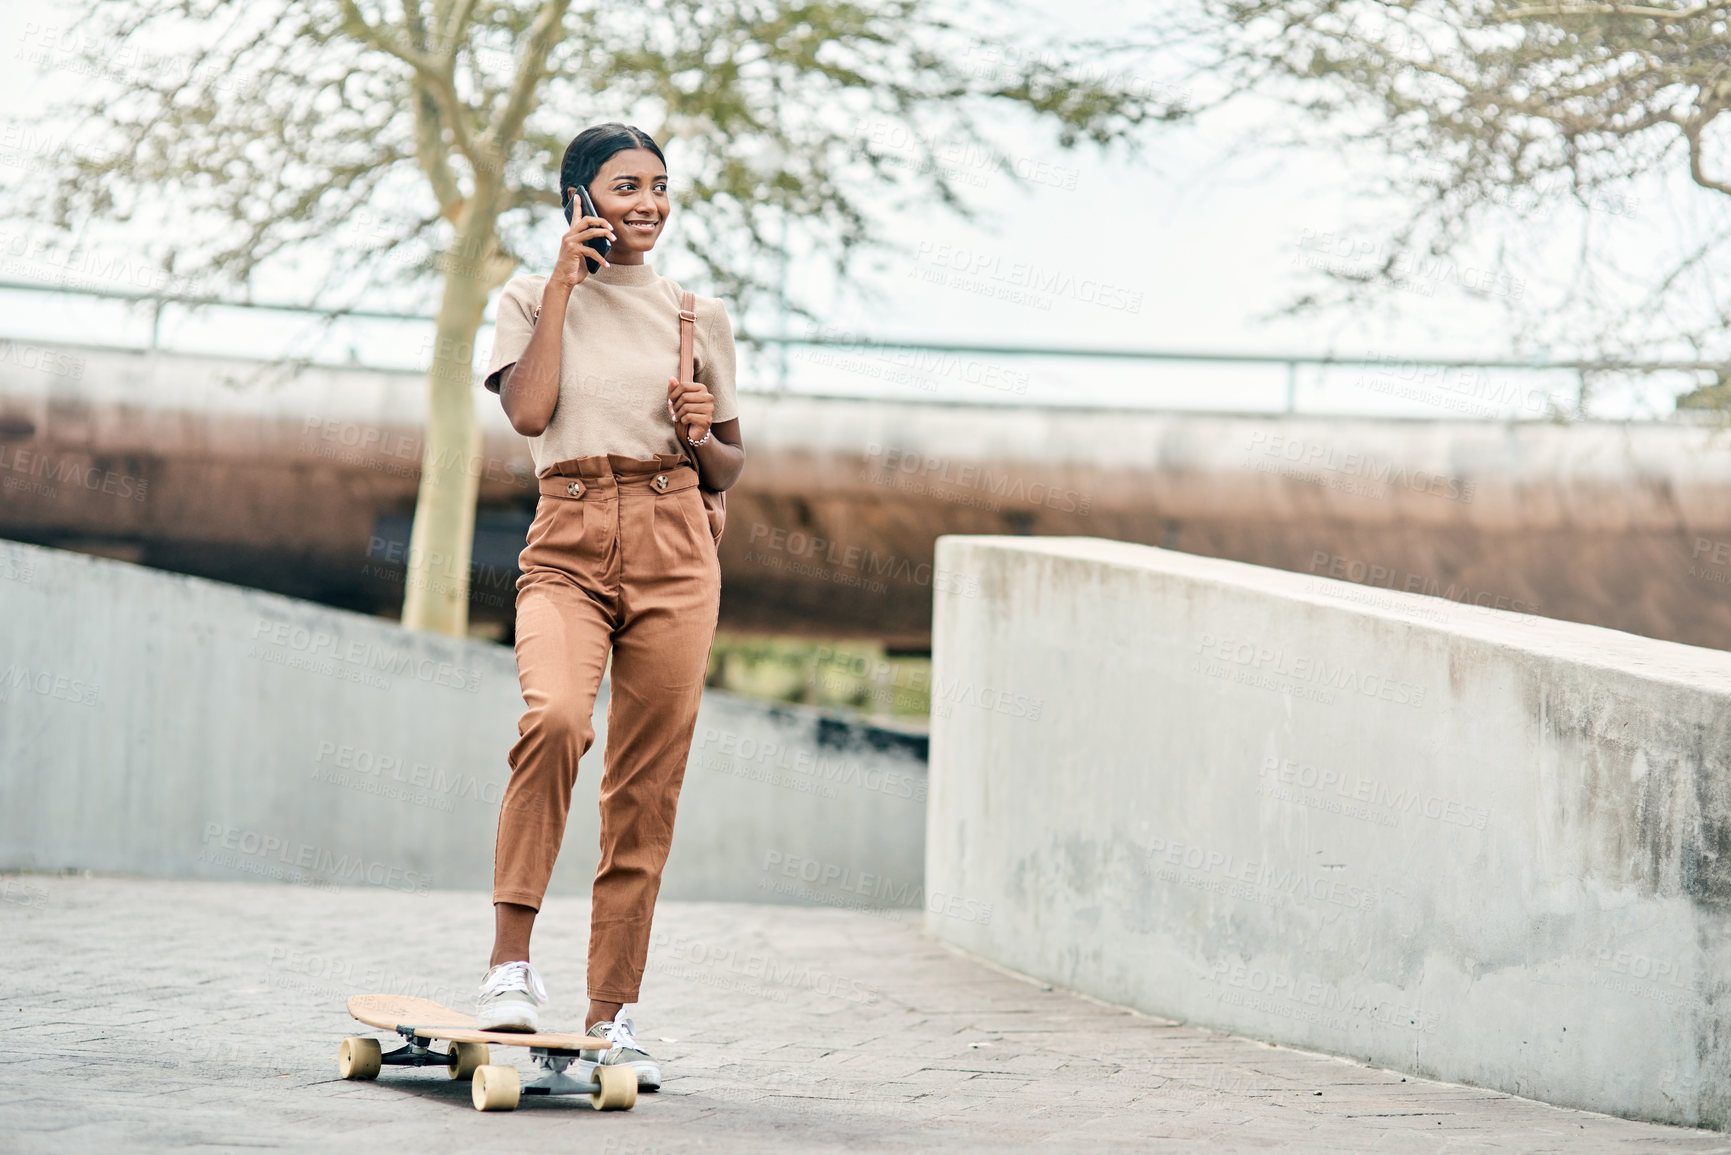 Buy stock photo Shot of an attractive young female student using her mobile phone while skateboarding on campus